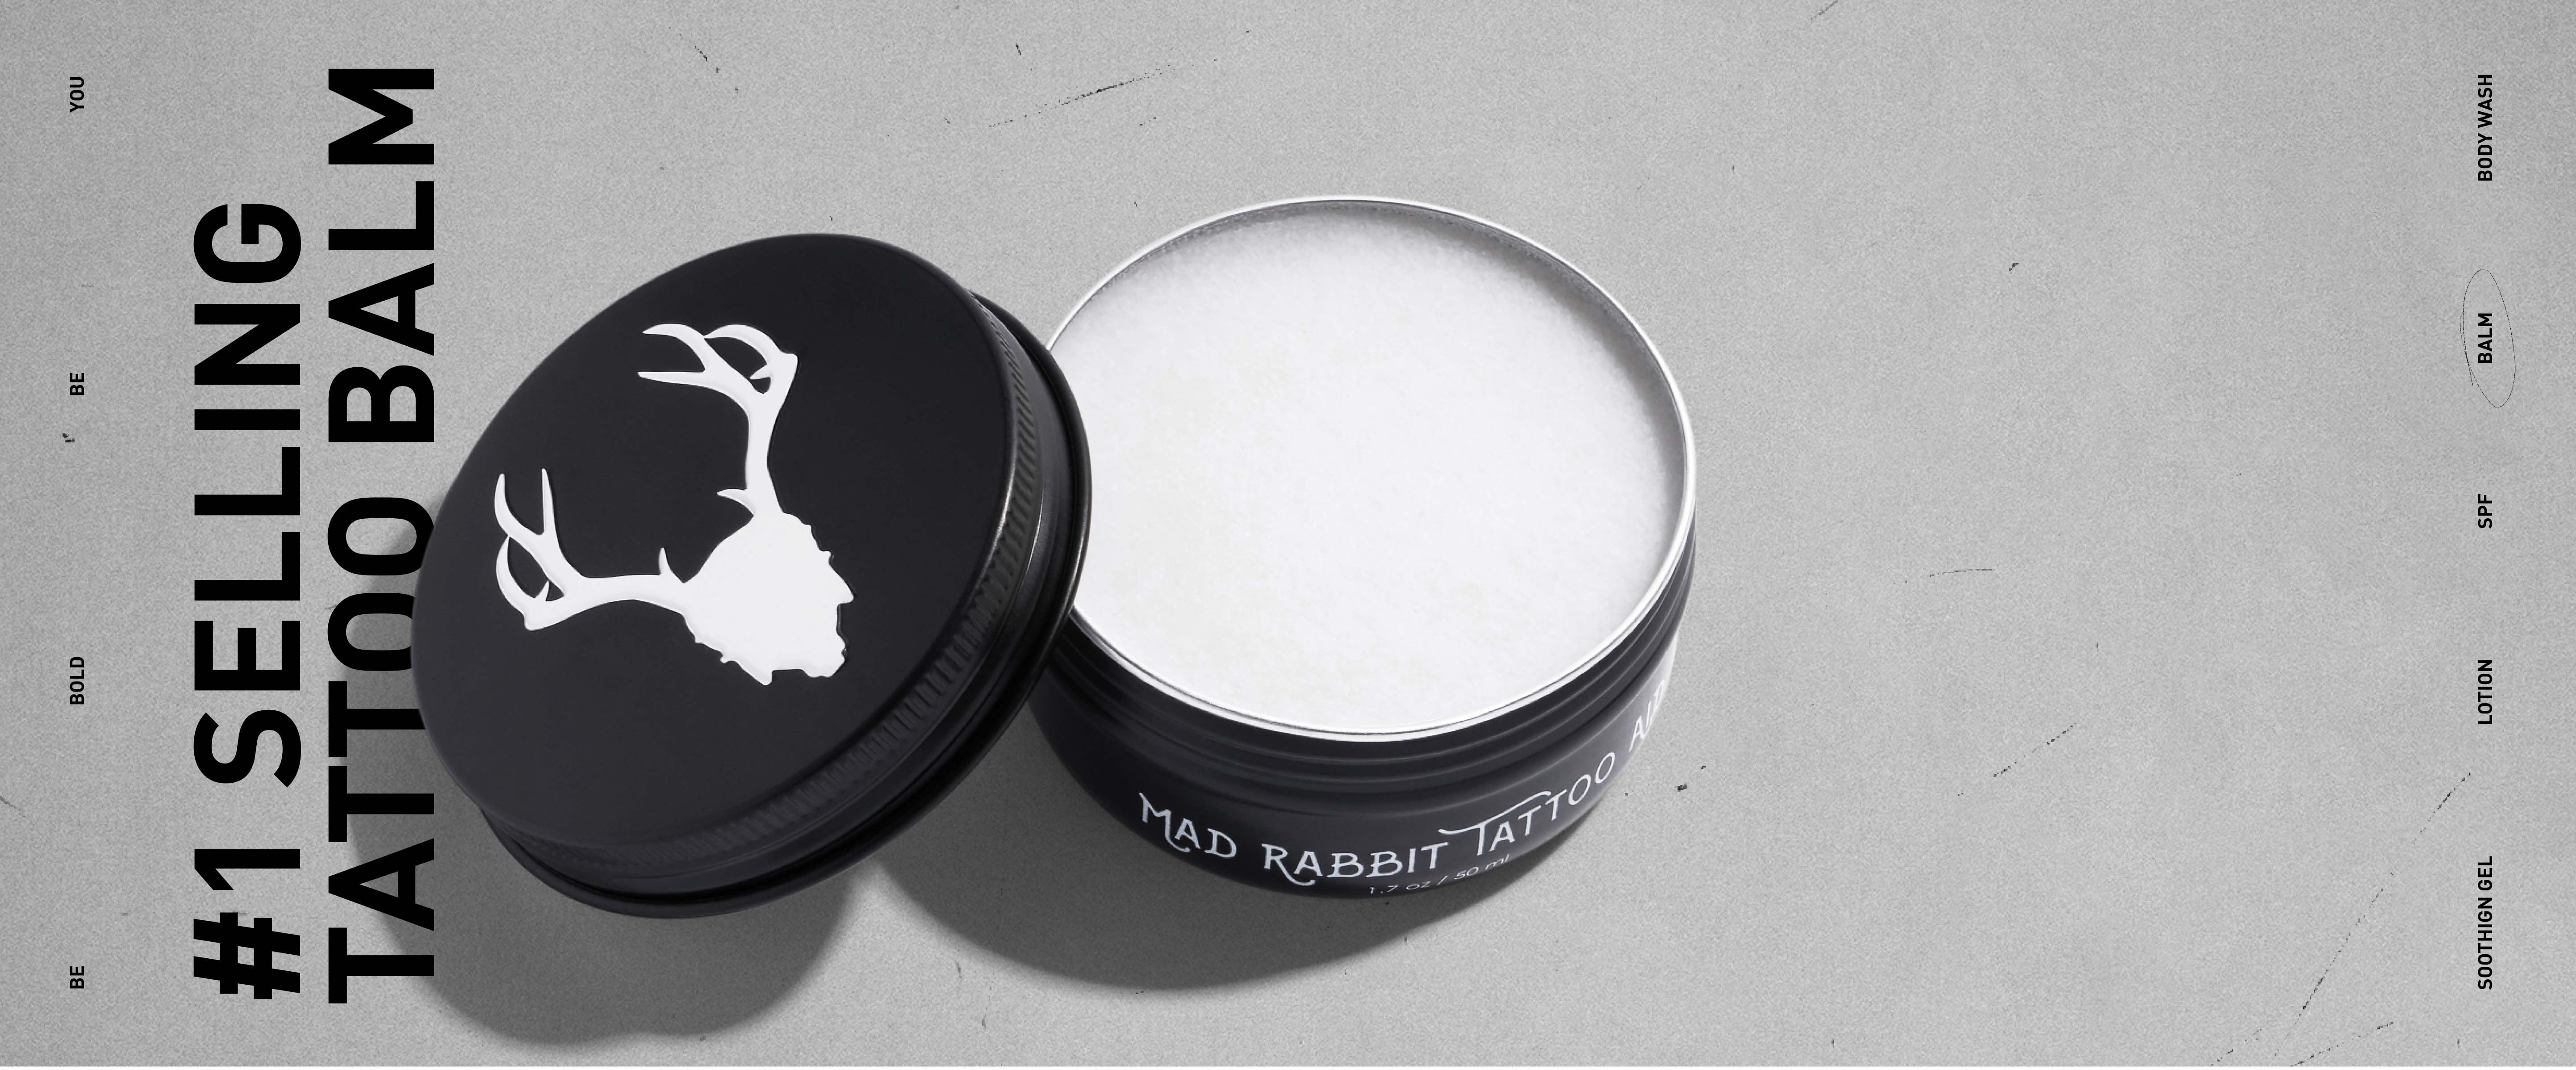 Mad Rabbit Tattoo Balm  Urban Outfitters